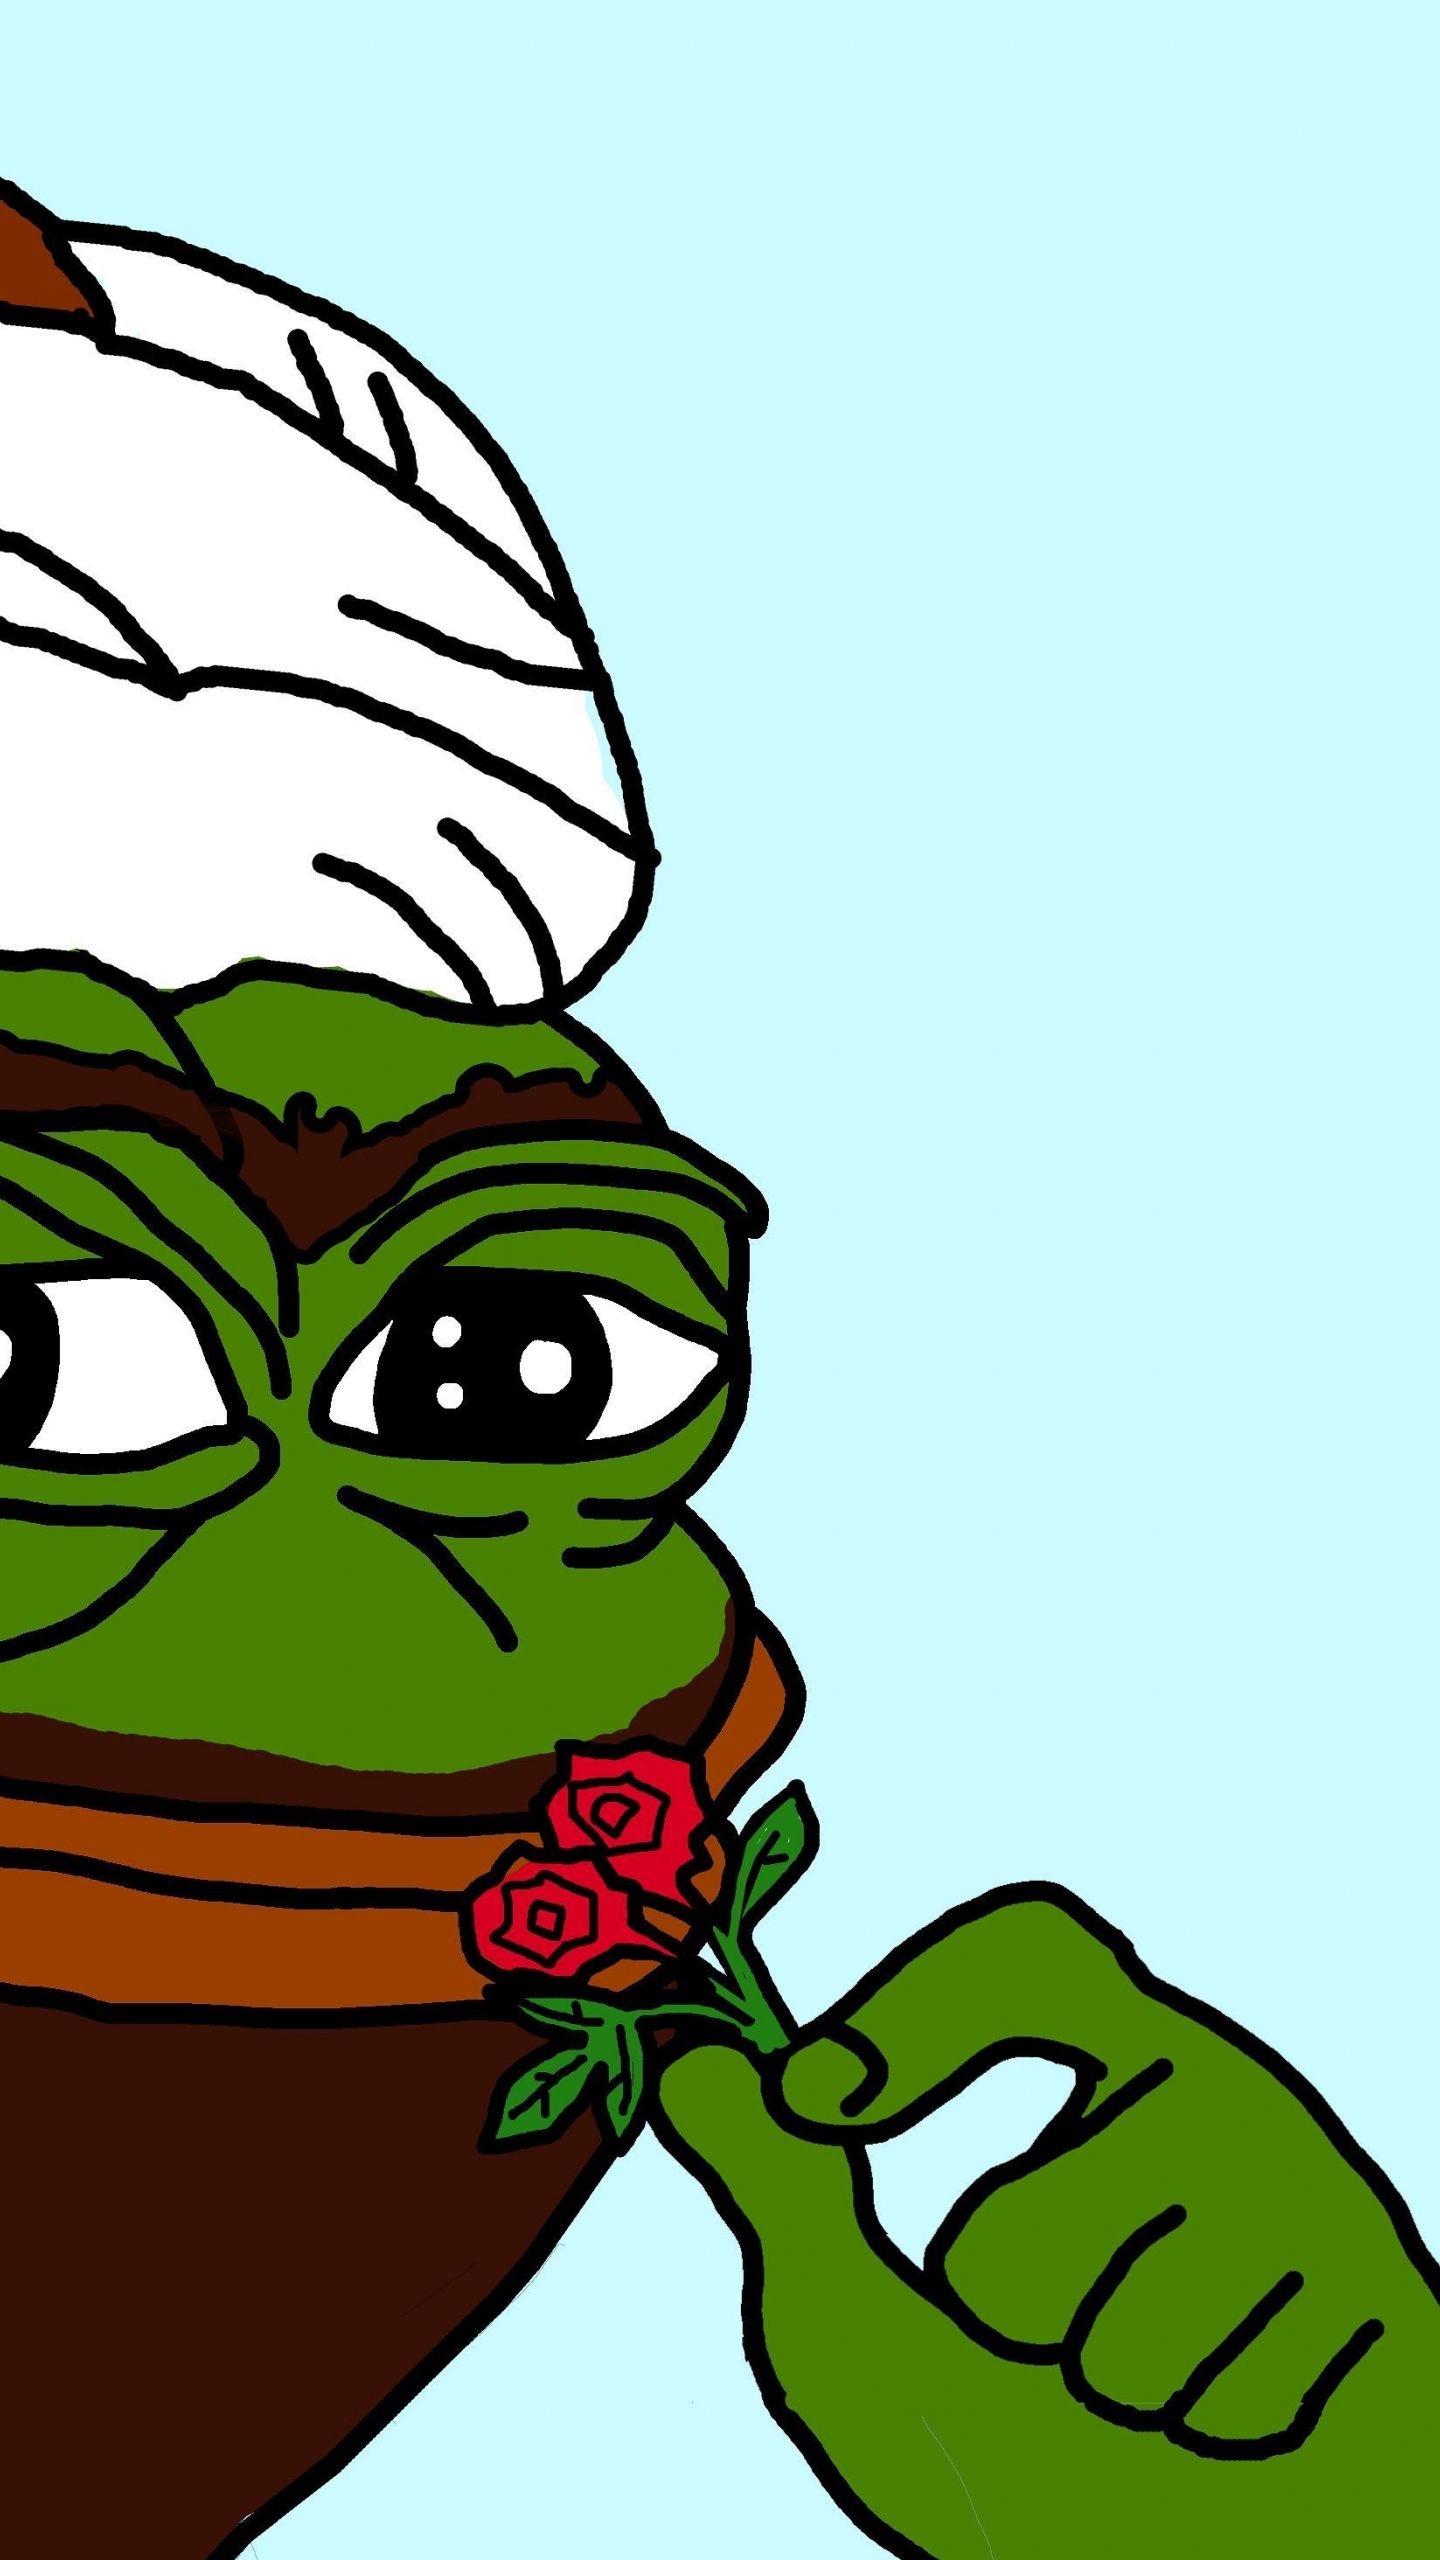 Free download Rare Pepe for [2928x2928] for your Desktop, Mobile & Tablet. Explore Pepe Meme Wallpaper. Funny Meme Wallpaper, Wallpaper Memes, Meme Wallpaper HD